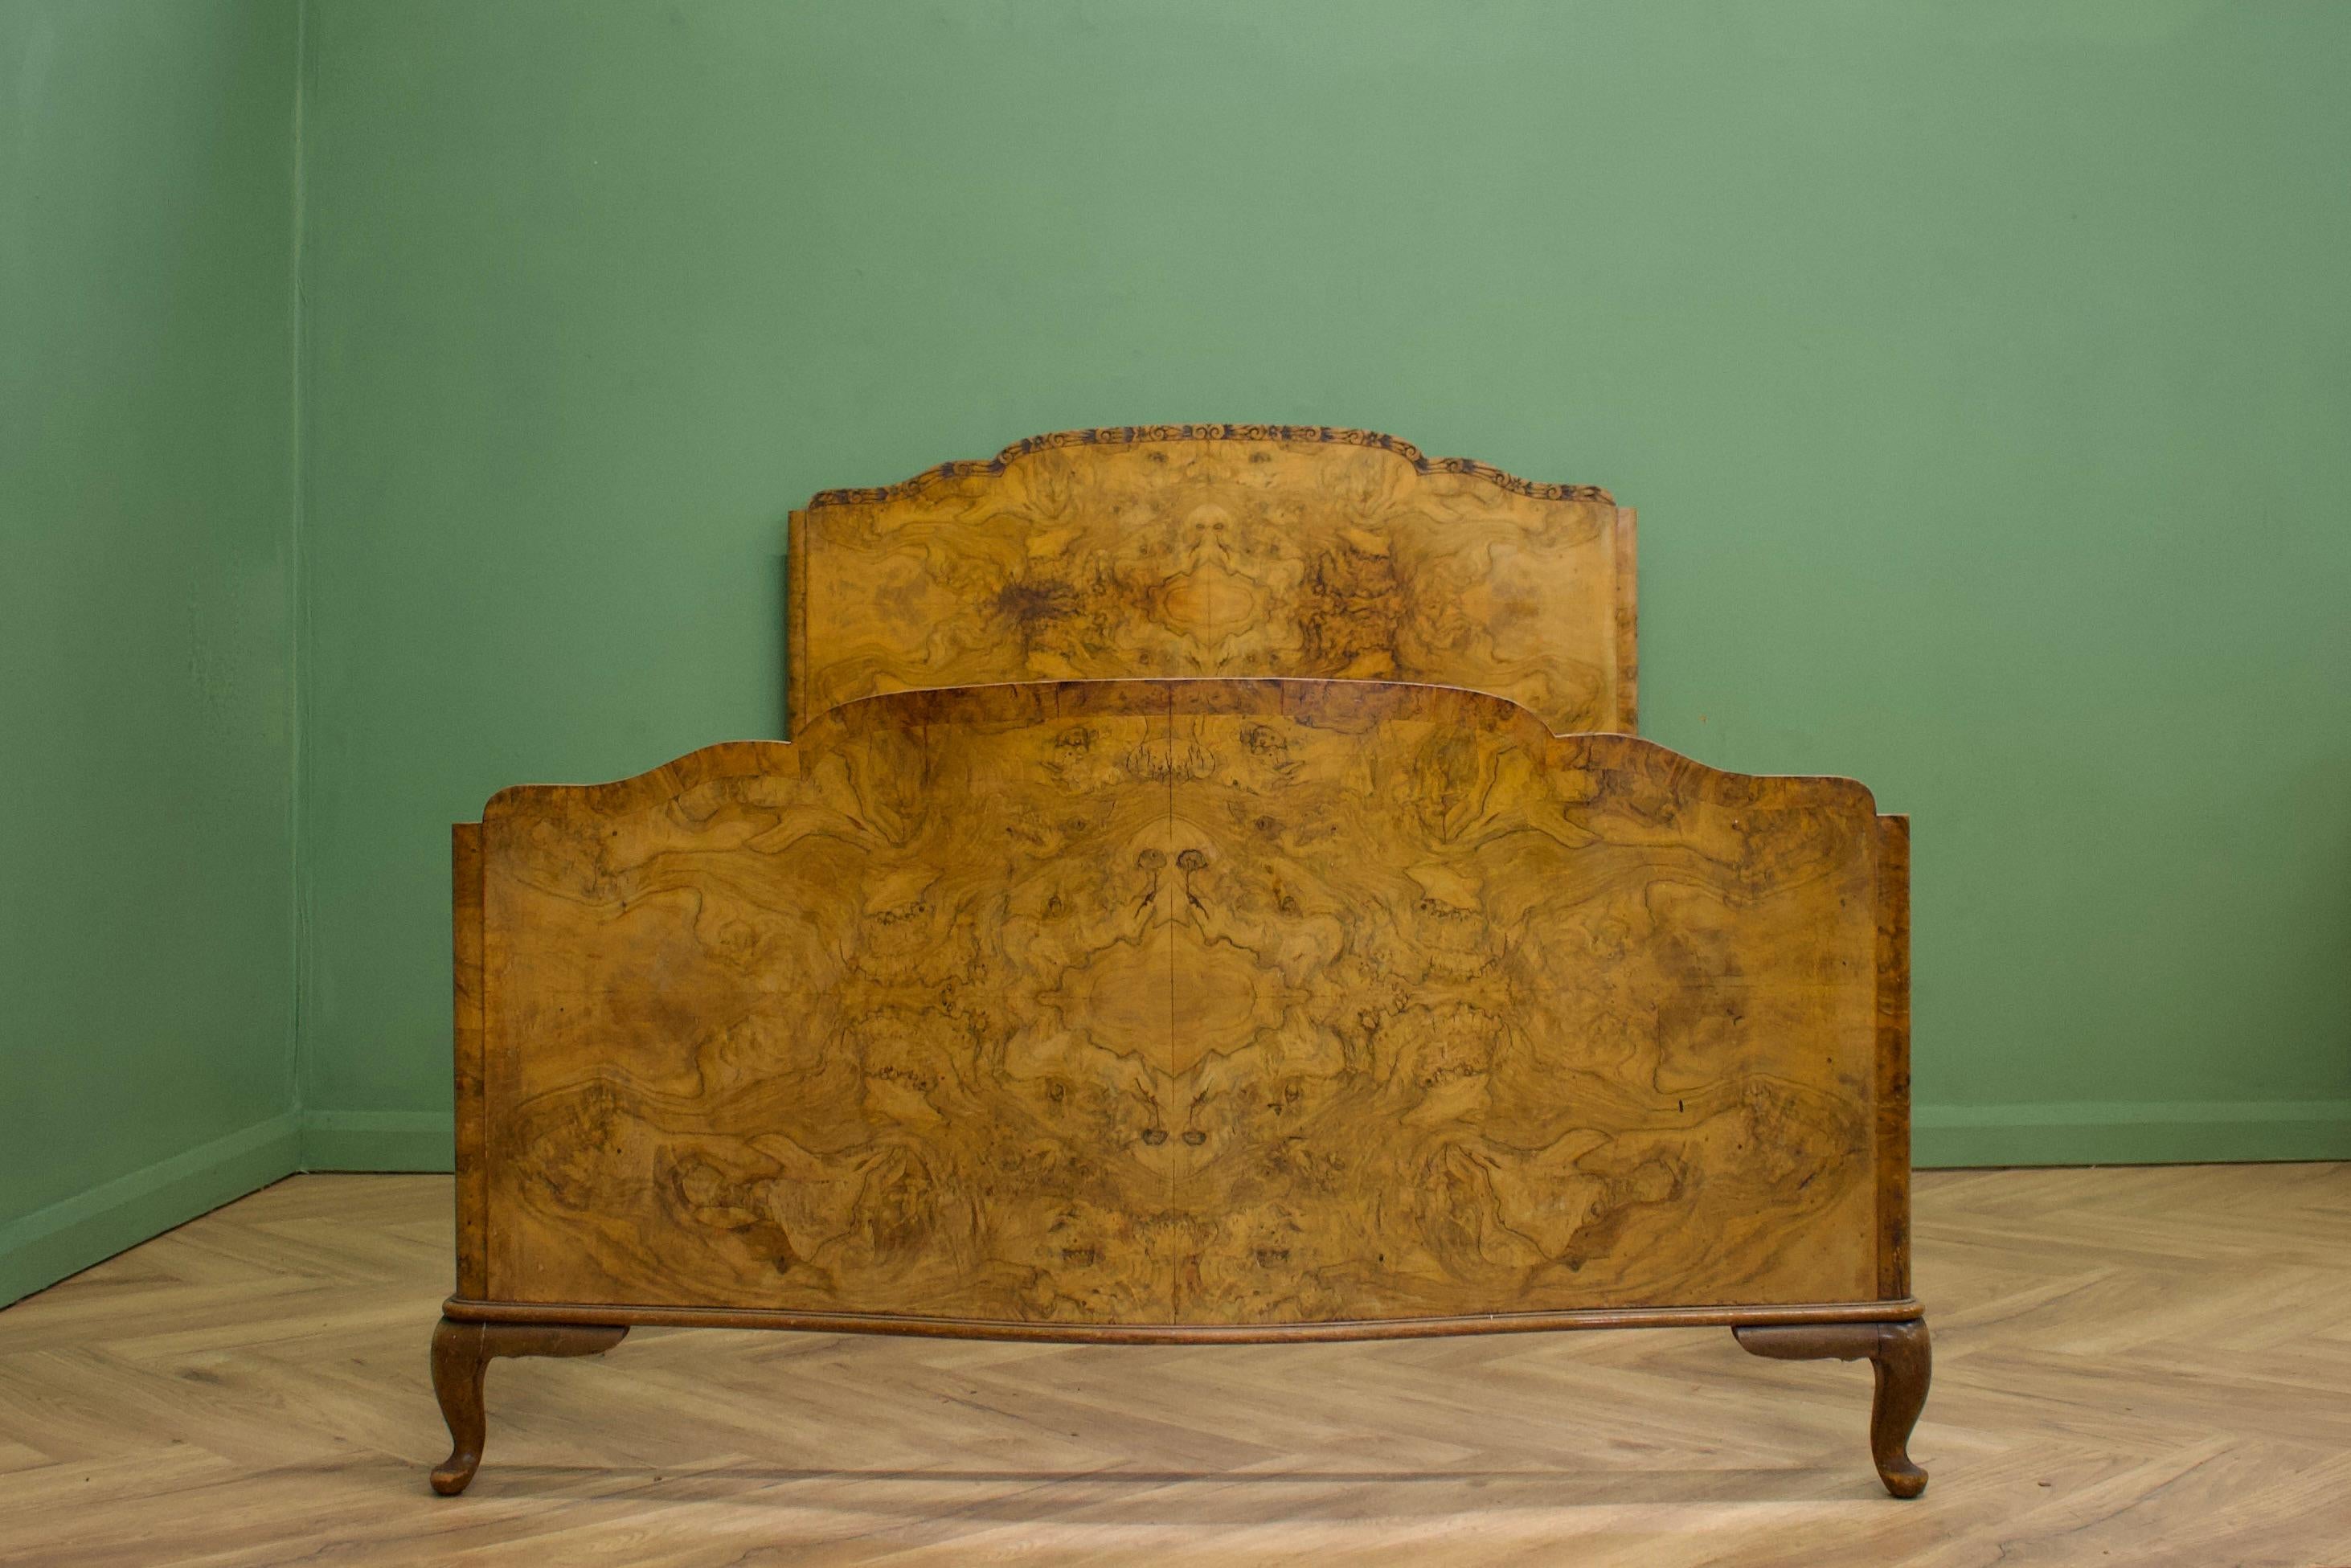 A beautiful, art deco burr walnut bed frame 
Standing on Queen Ann legs, the foot board has a serpentine shape and also features beautiful carved detail to the headboard


It will fit a standard UK double bed base (inside measurements 138cm wide and